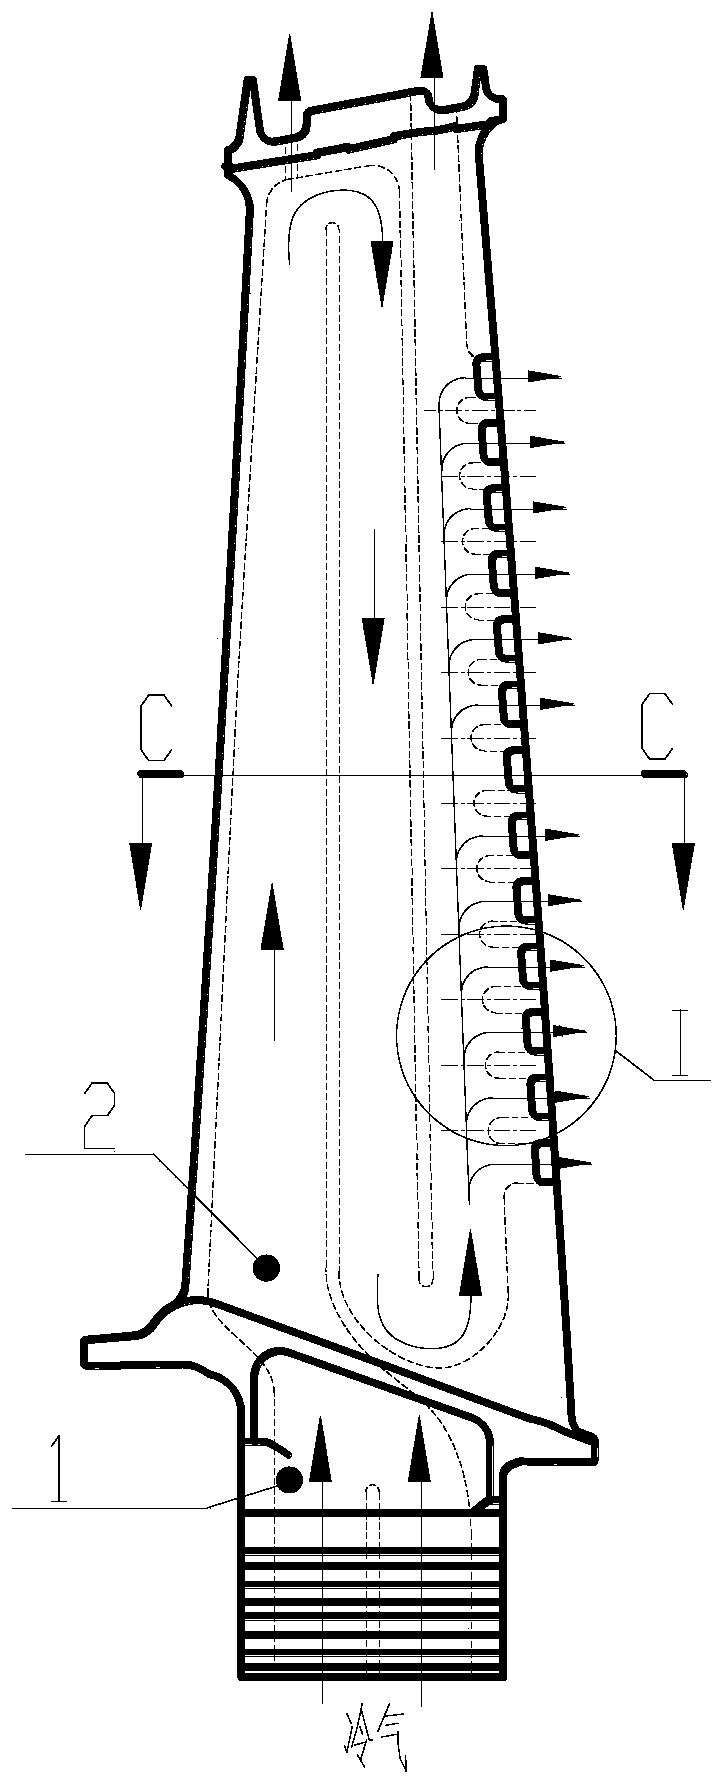 Tapered inclined exhaust splitting seam structure for turbine blade trailing edge